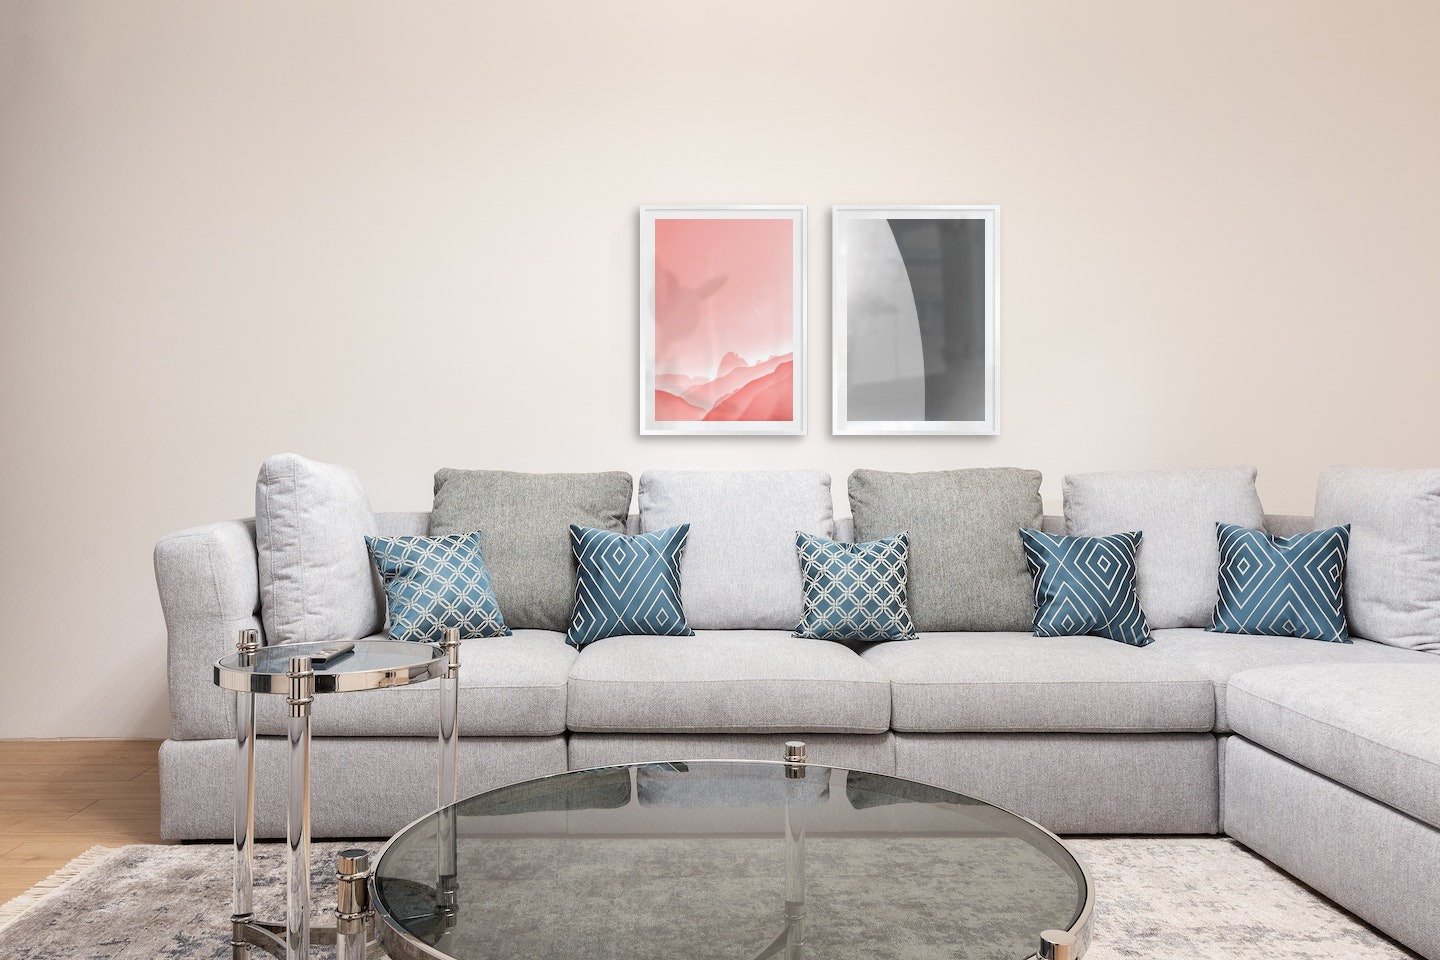 Gallery wall with picture frames in silver in sizes 50x70 with prints "Pink sky" and "Line"